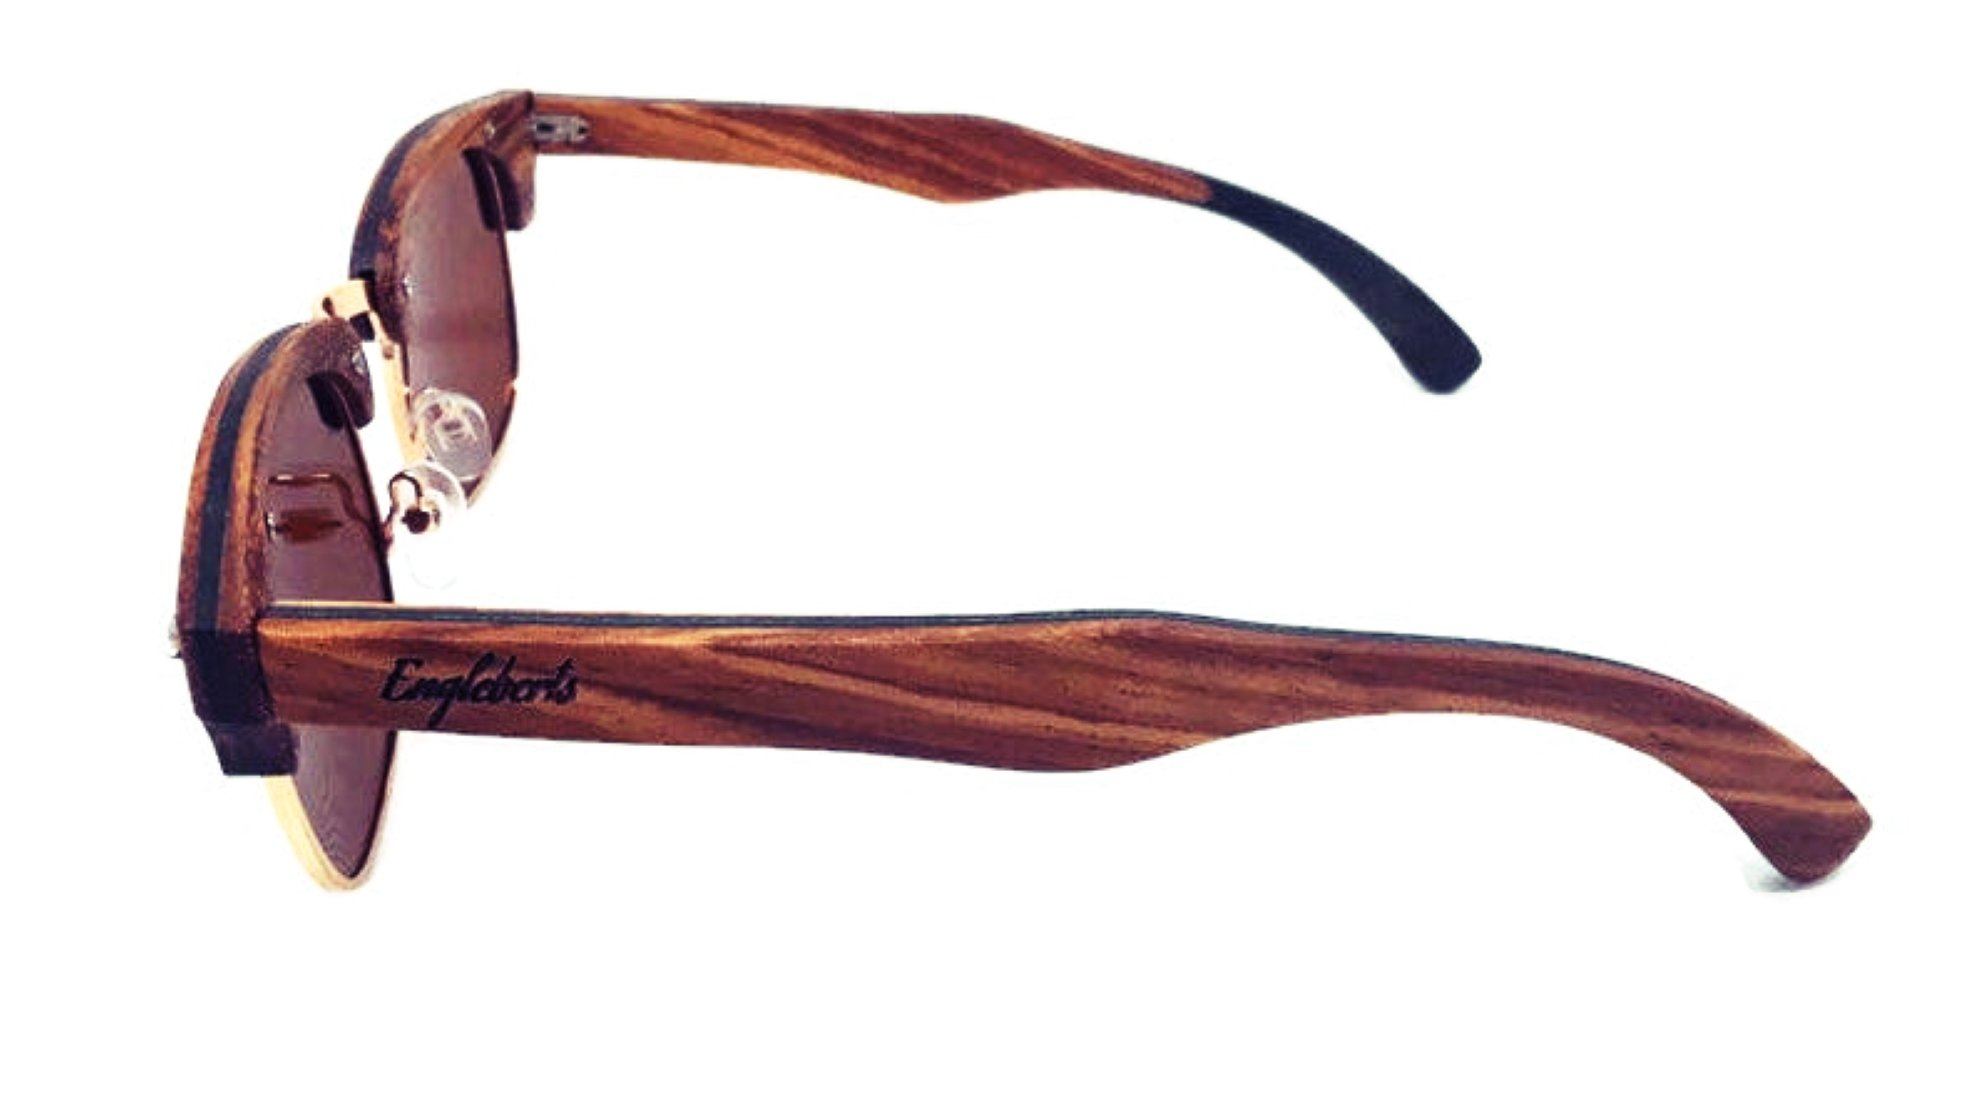 Real Ebony and ZebraWood Sunglasses With Bamboo Case, Tea Colored Sunglasses 